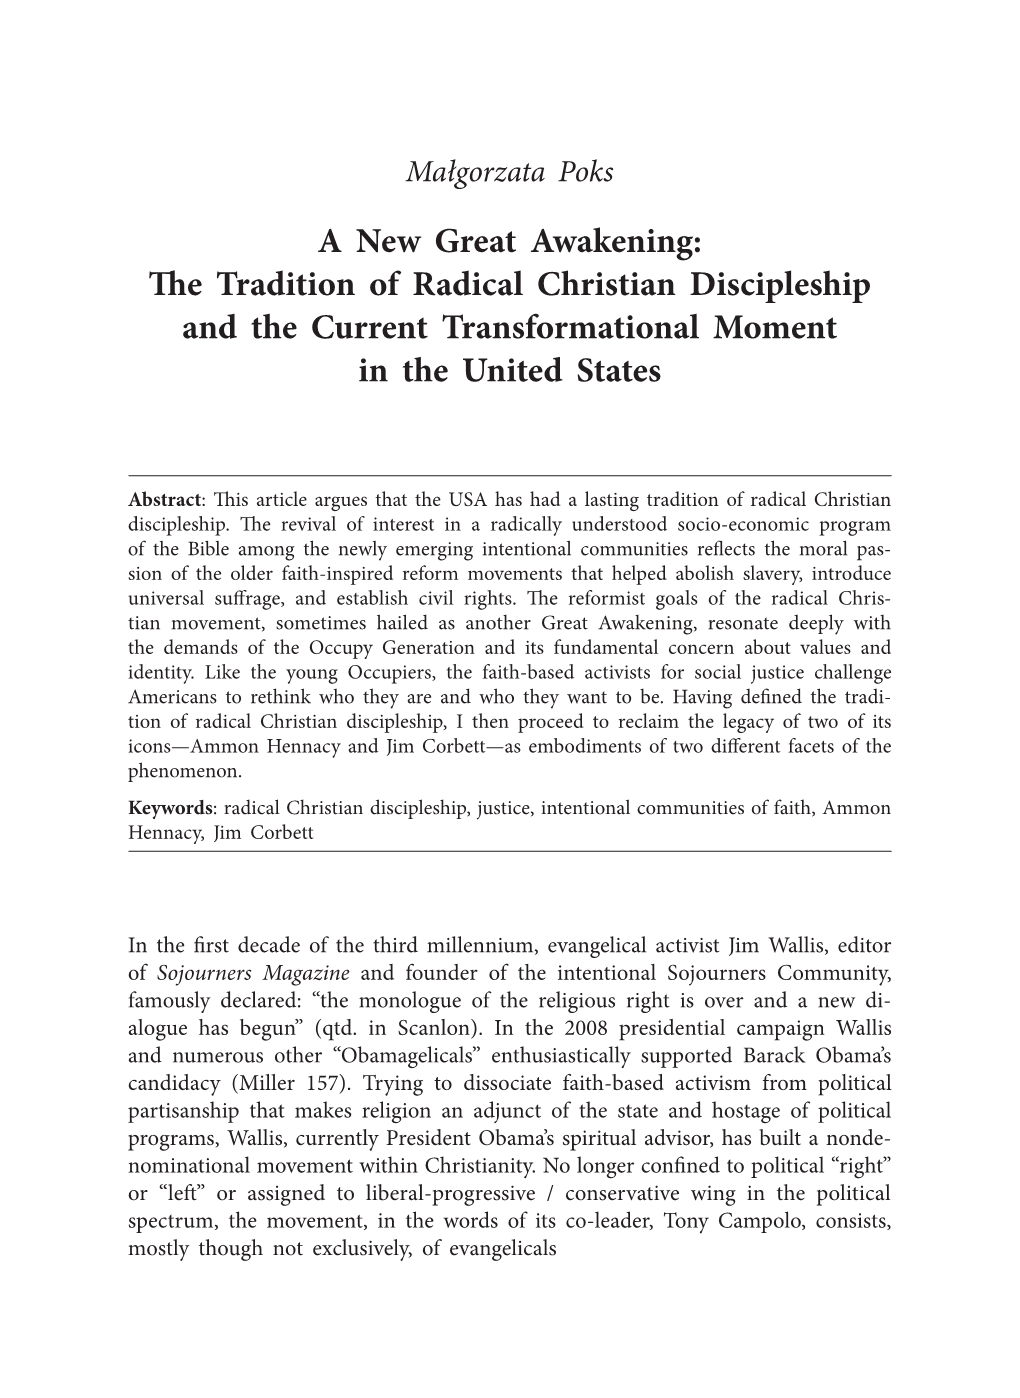 A New Great Awakening: the Tradition of Radical Christian Discipleship and the Current Transformational Moment in the United States